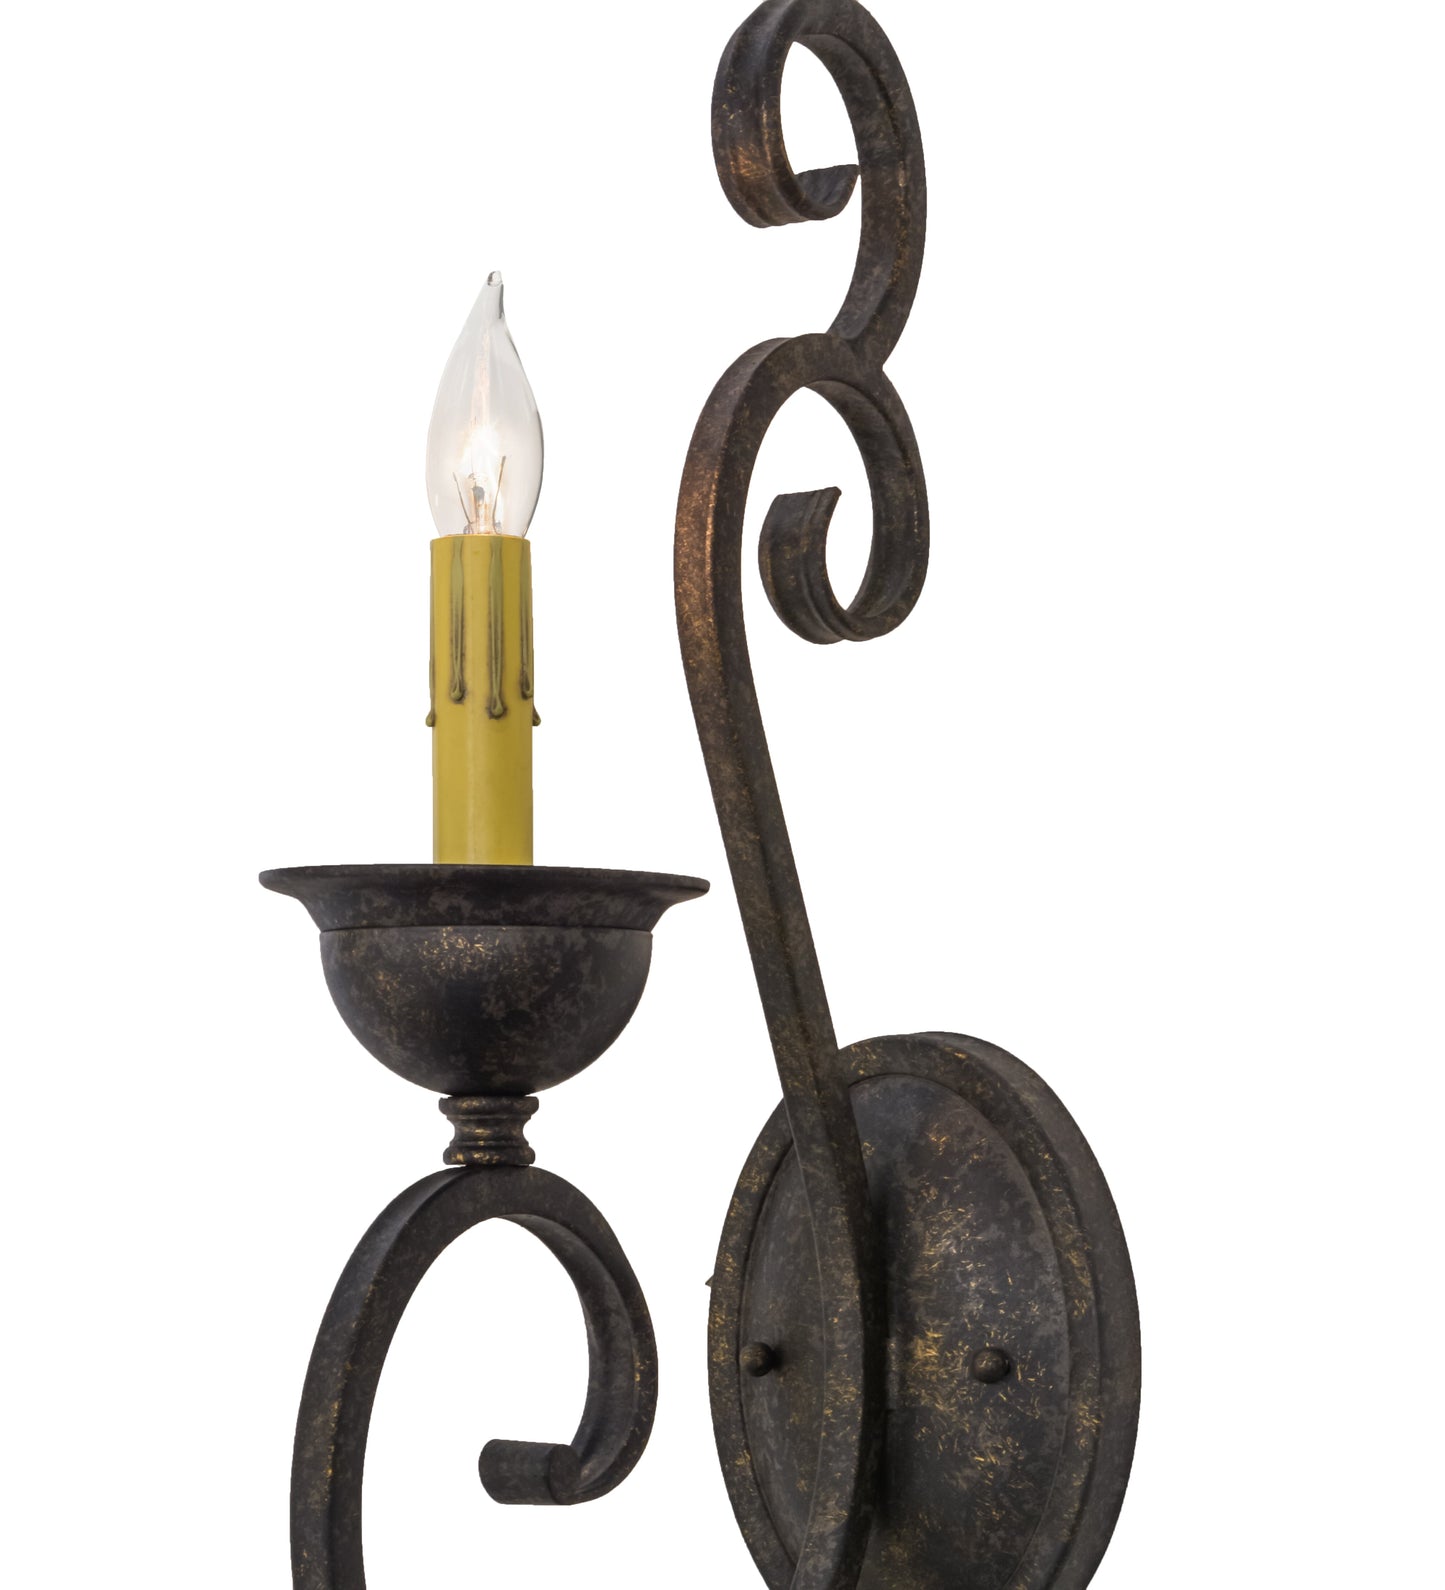 5" Fernando Wall Sconce by 2nd Ave Lighting